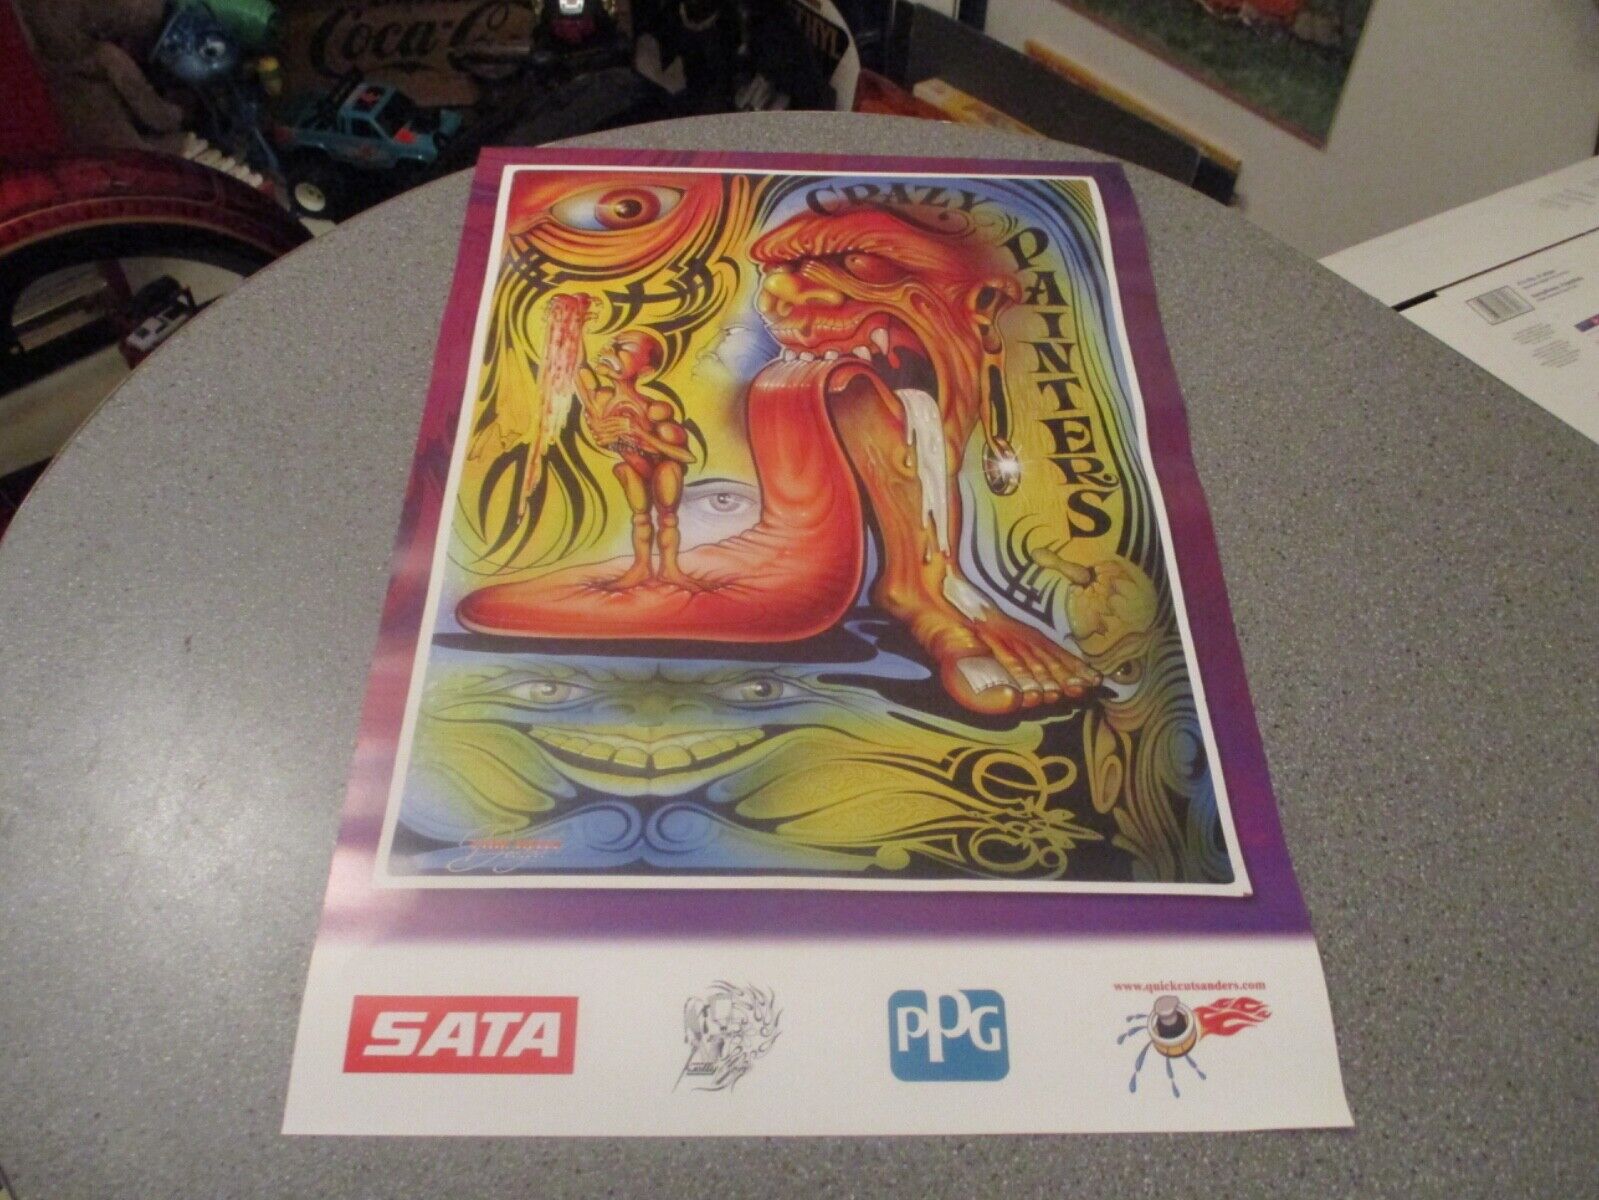 S.E.M.A POSTER 2010 SATS AIR BRUSH PPG GREAT ARTWORK